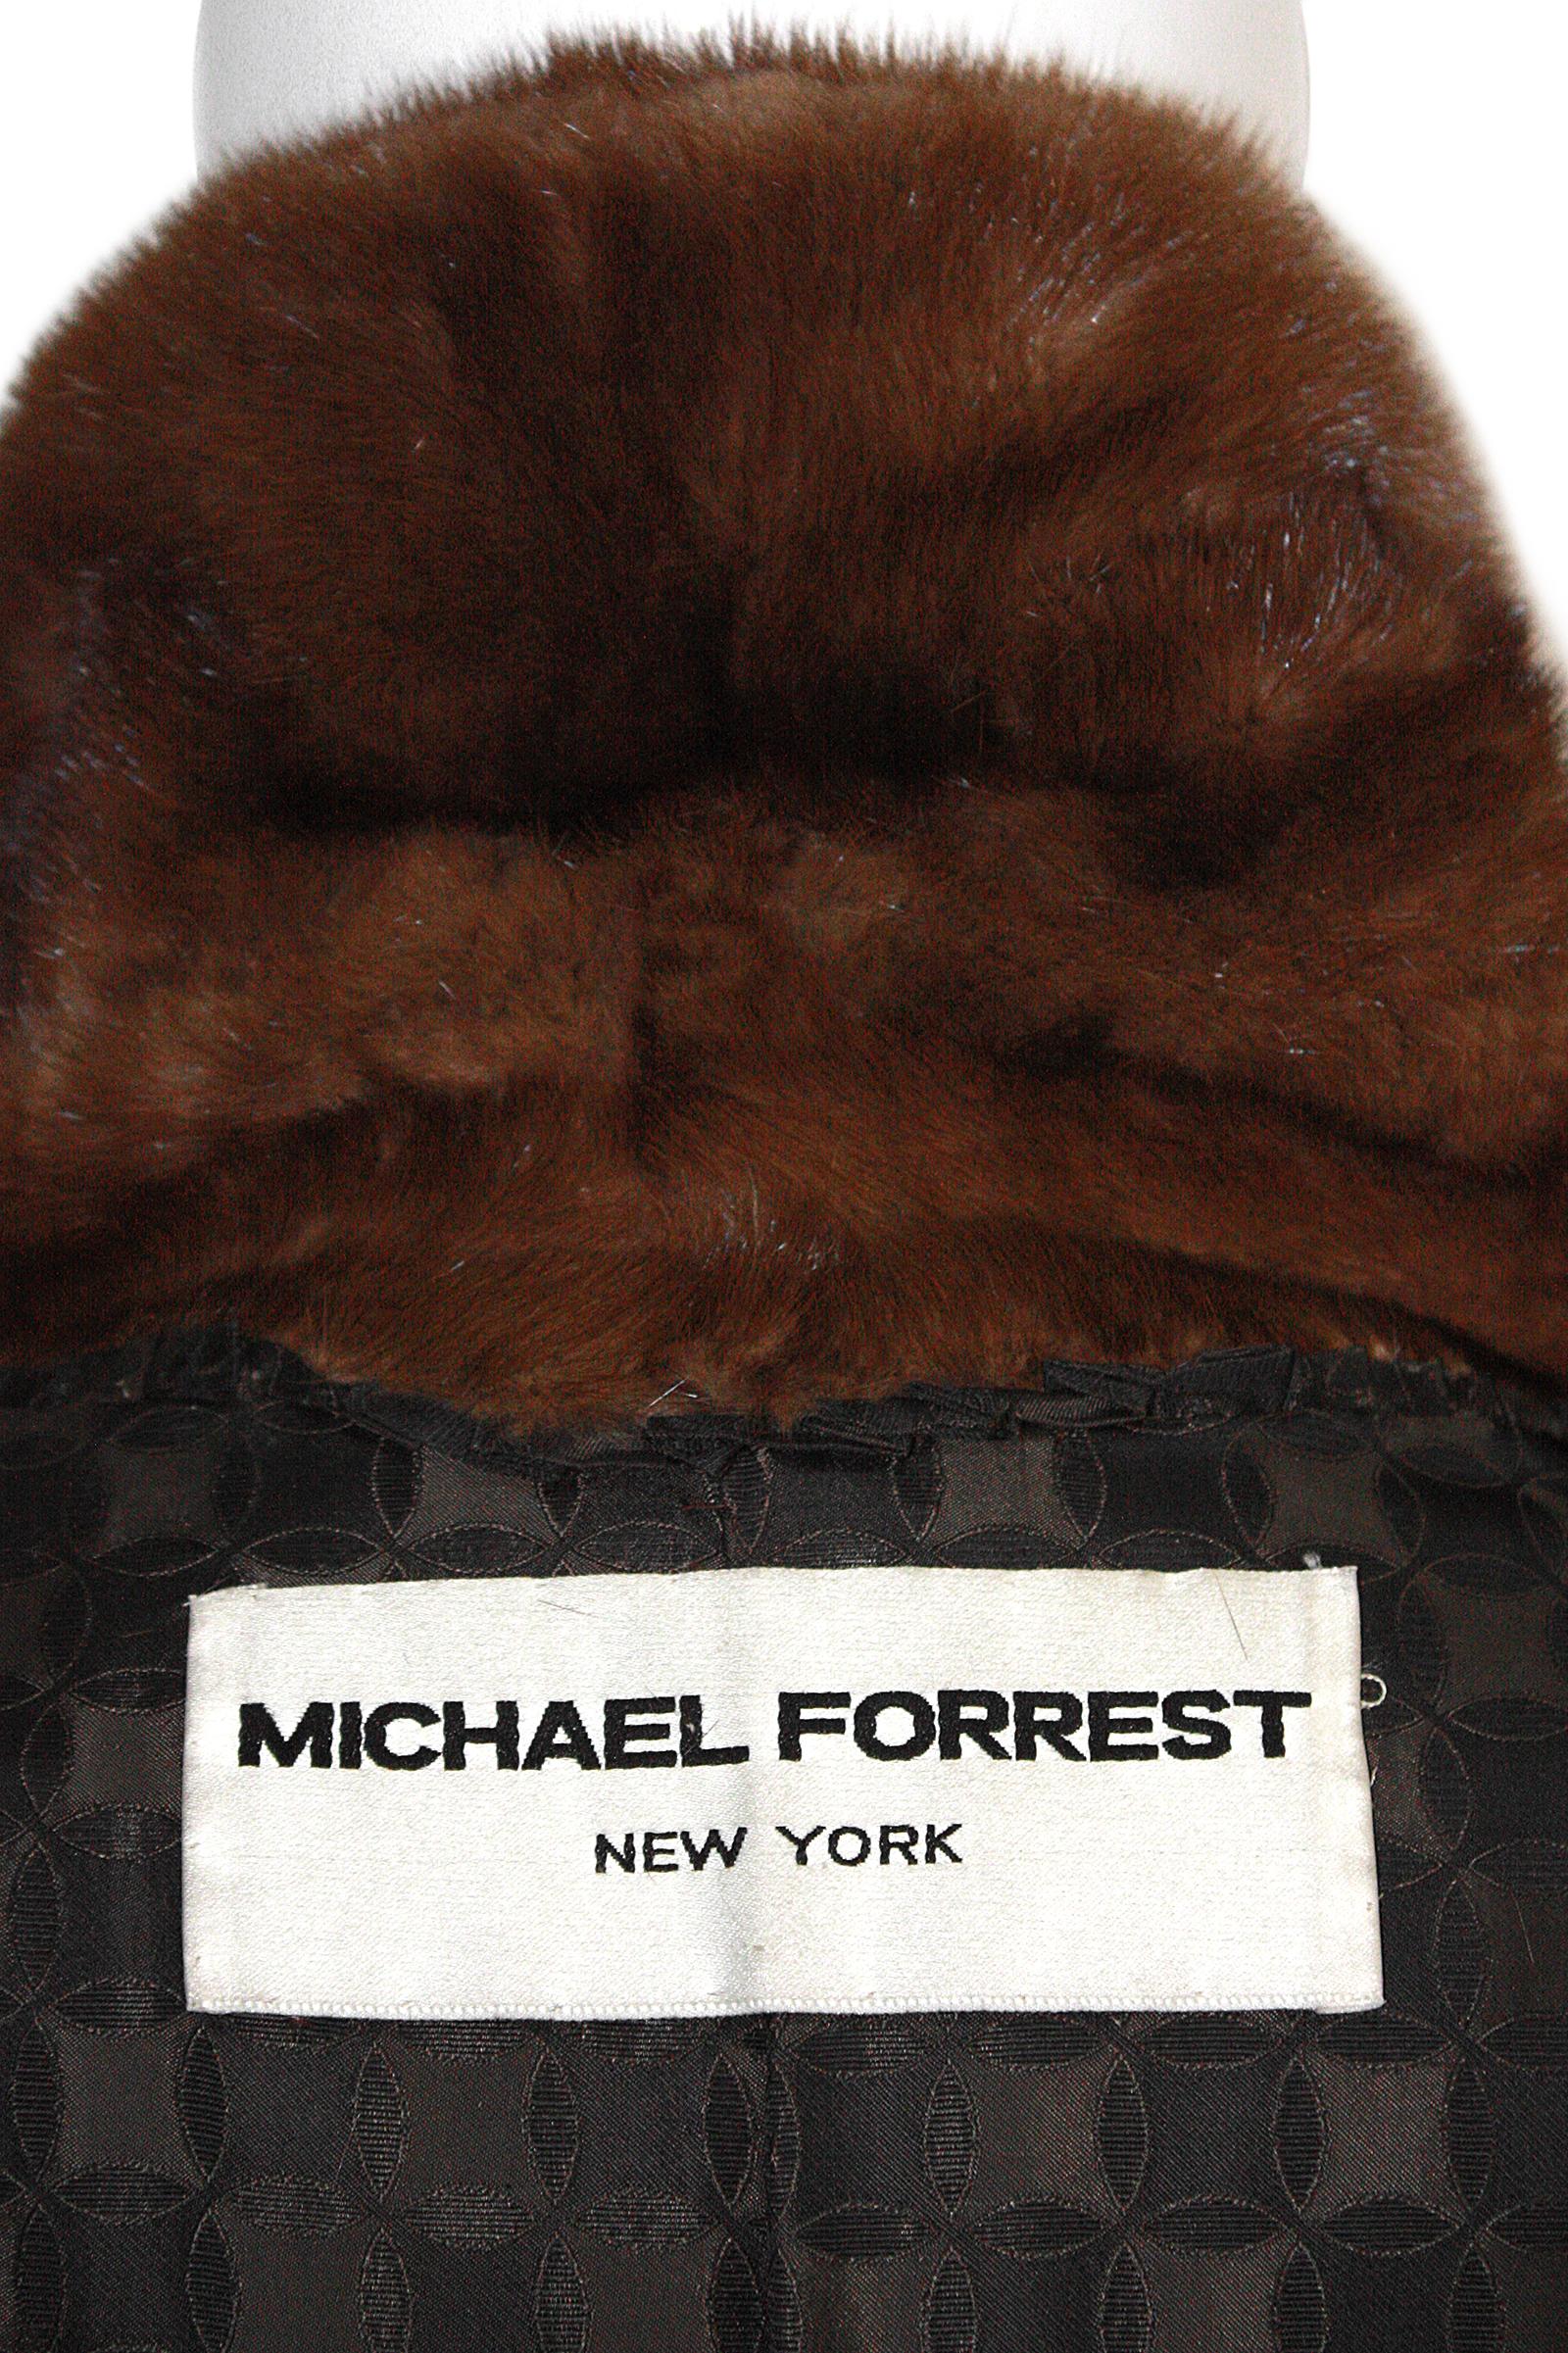 Women's NORMAN NORELL for MICHAEL FORREST of New York sumptuous Natural Mink Coat For Sale